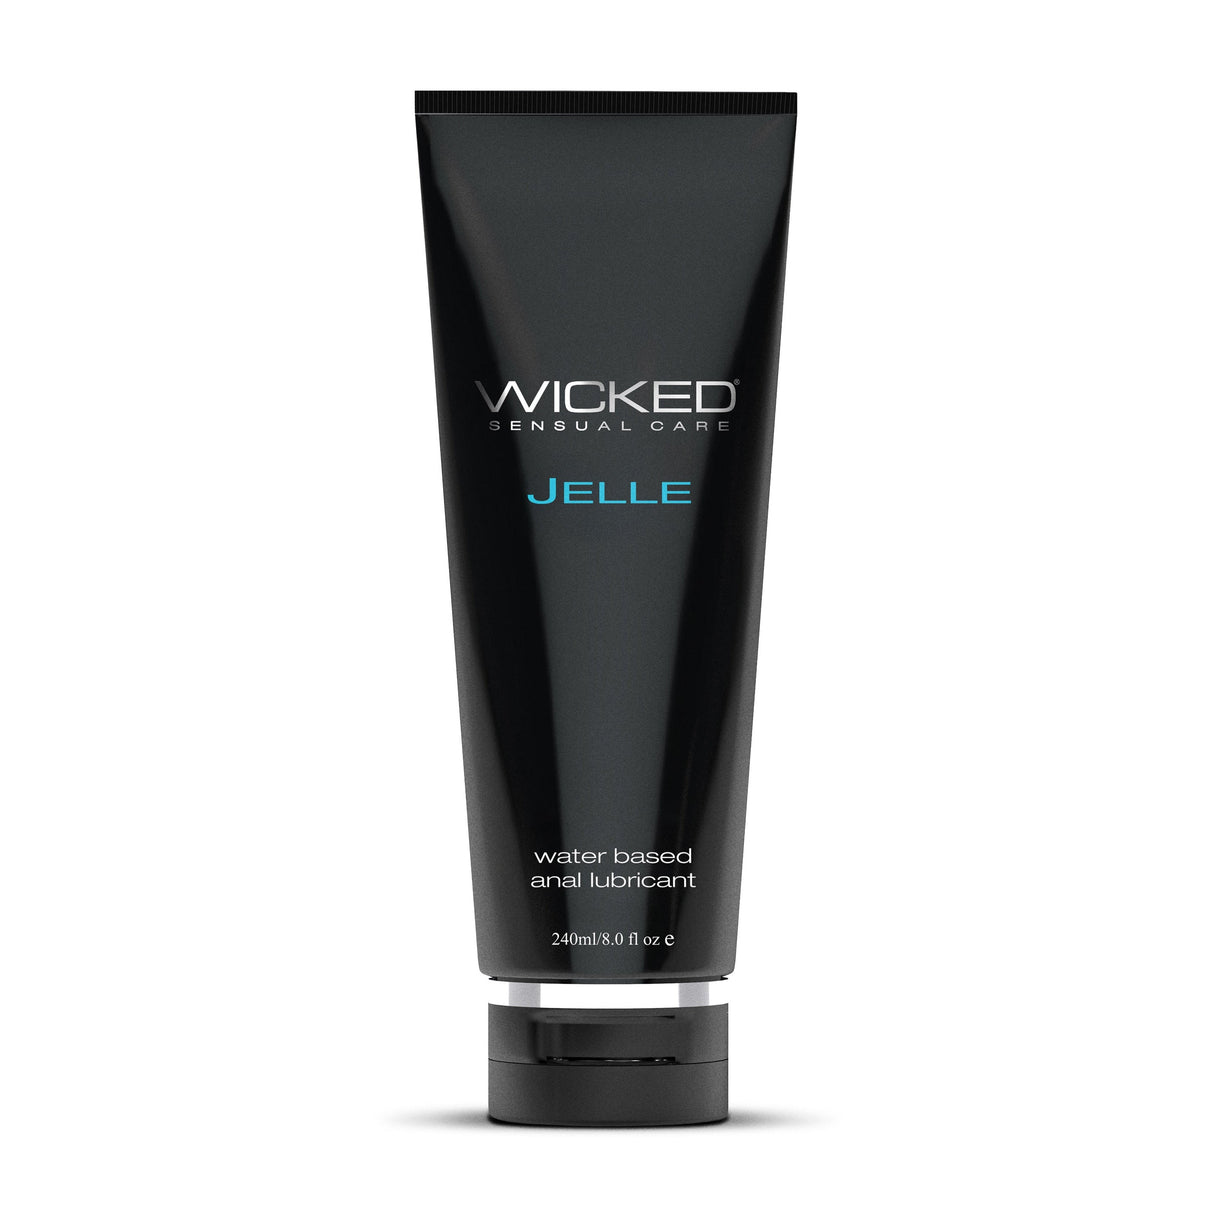 Wicked Jelle Waterbased Anal Lubricant